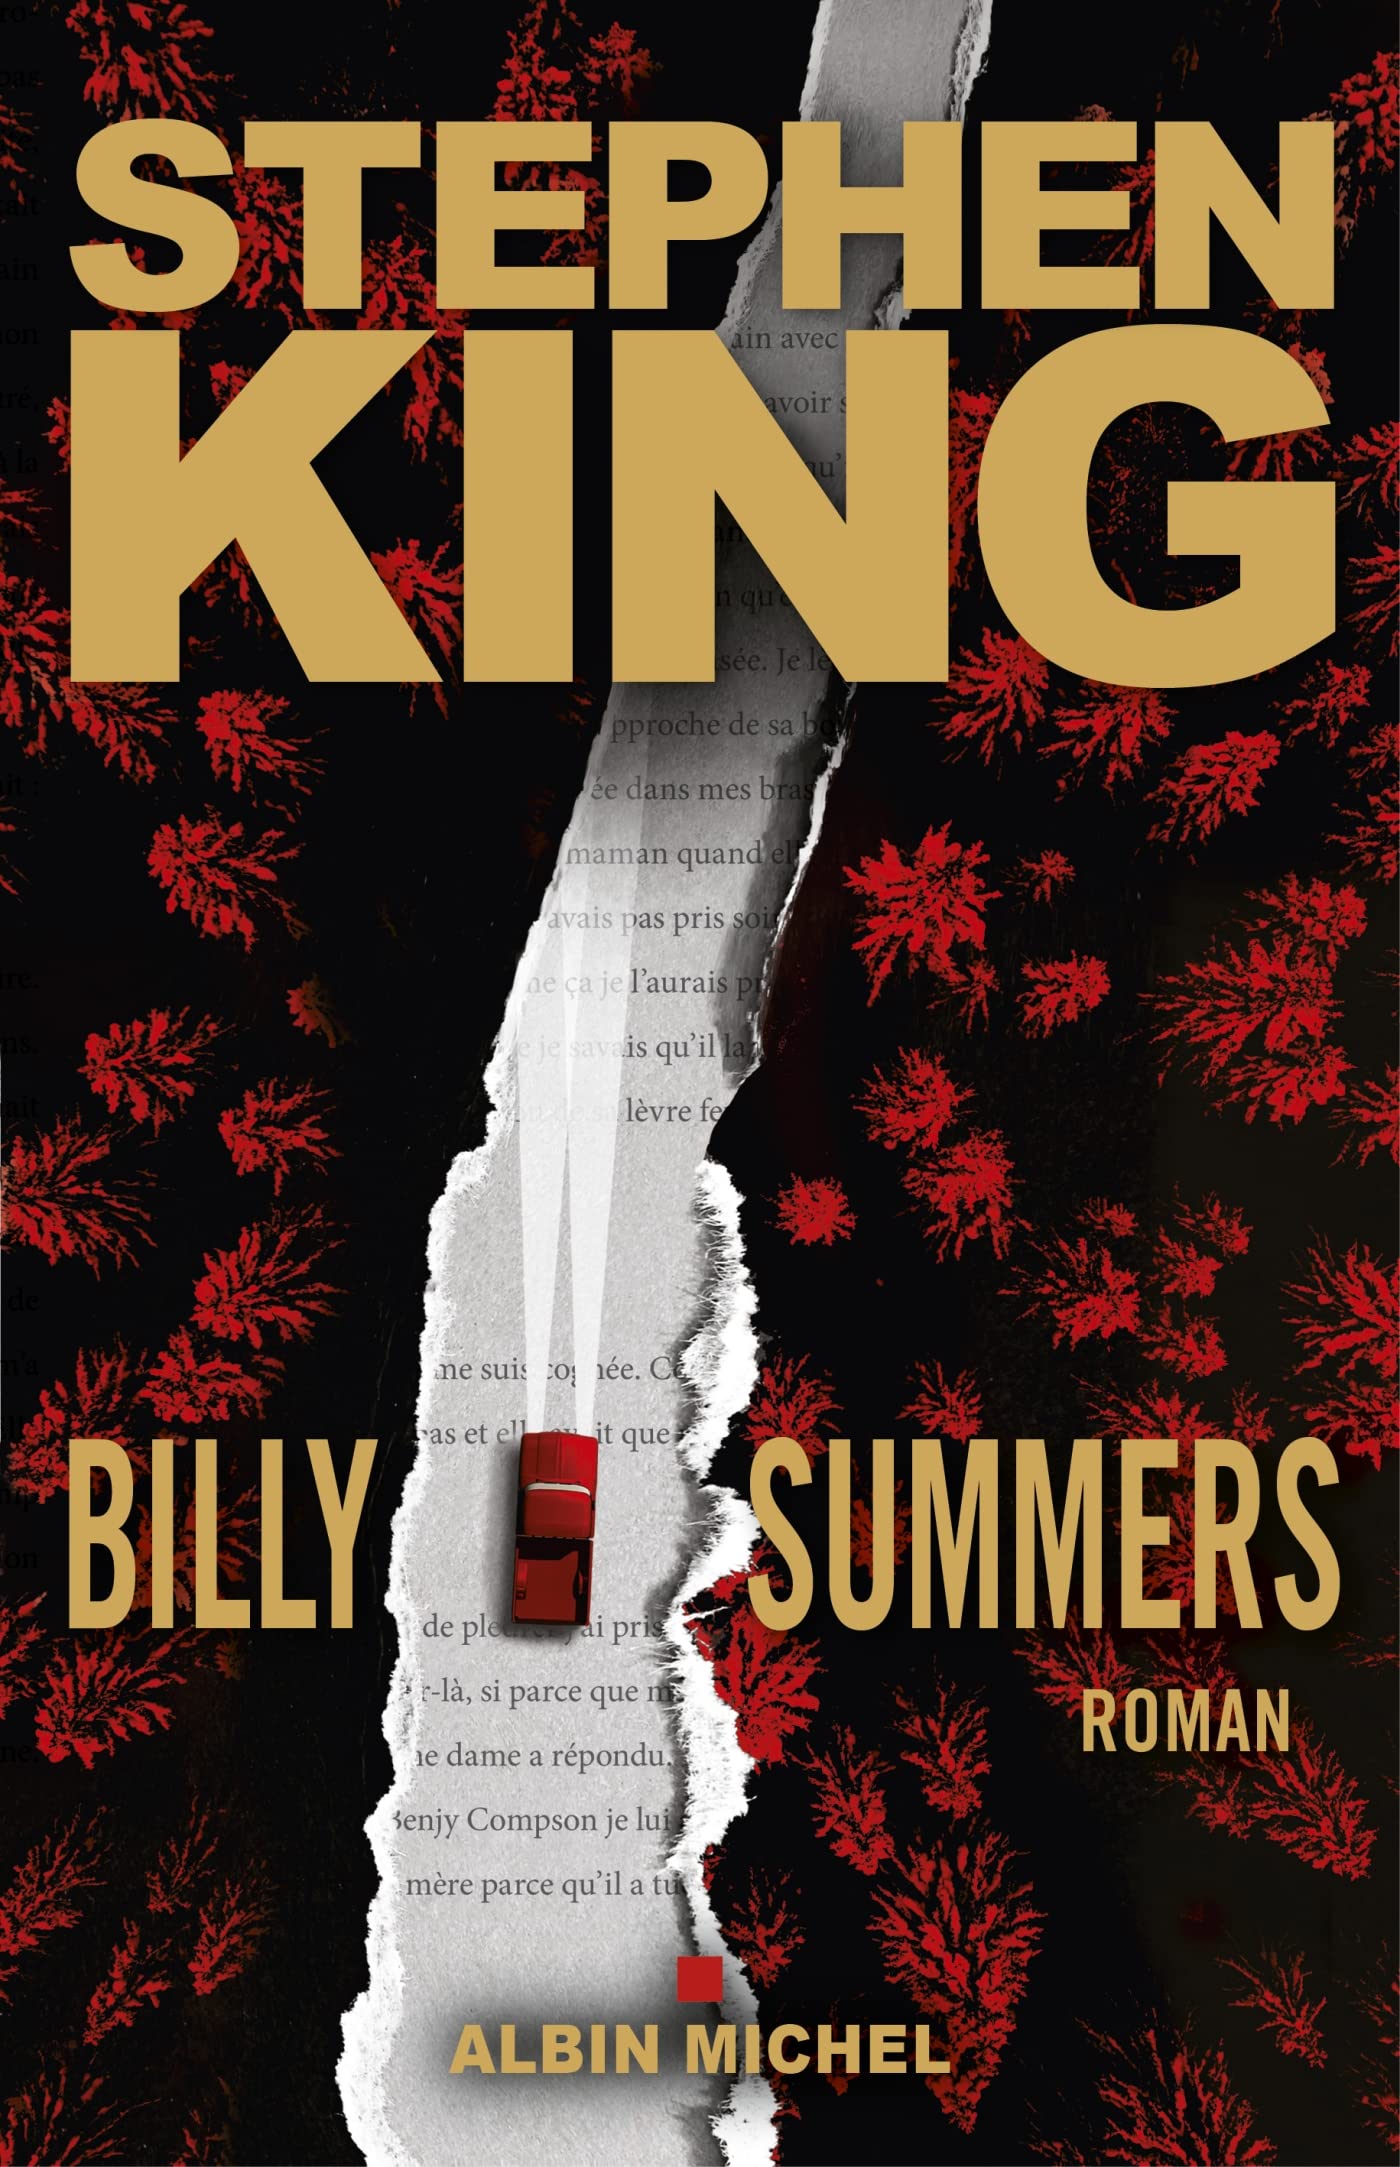 Billy Summers (Version francaise) (Paperback)